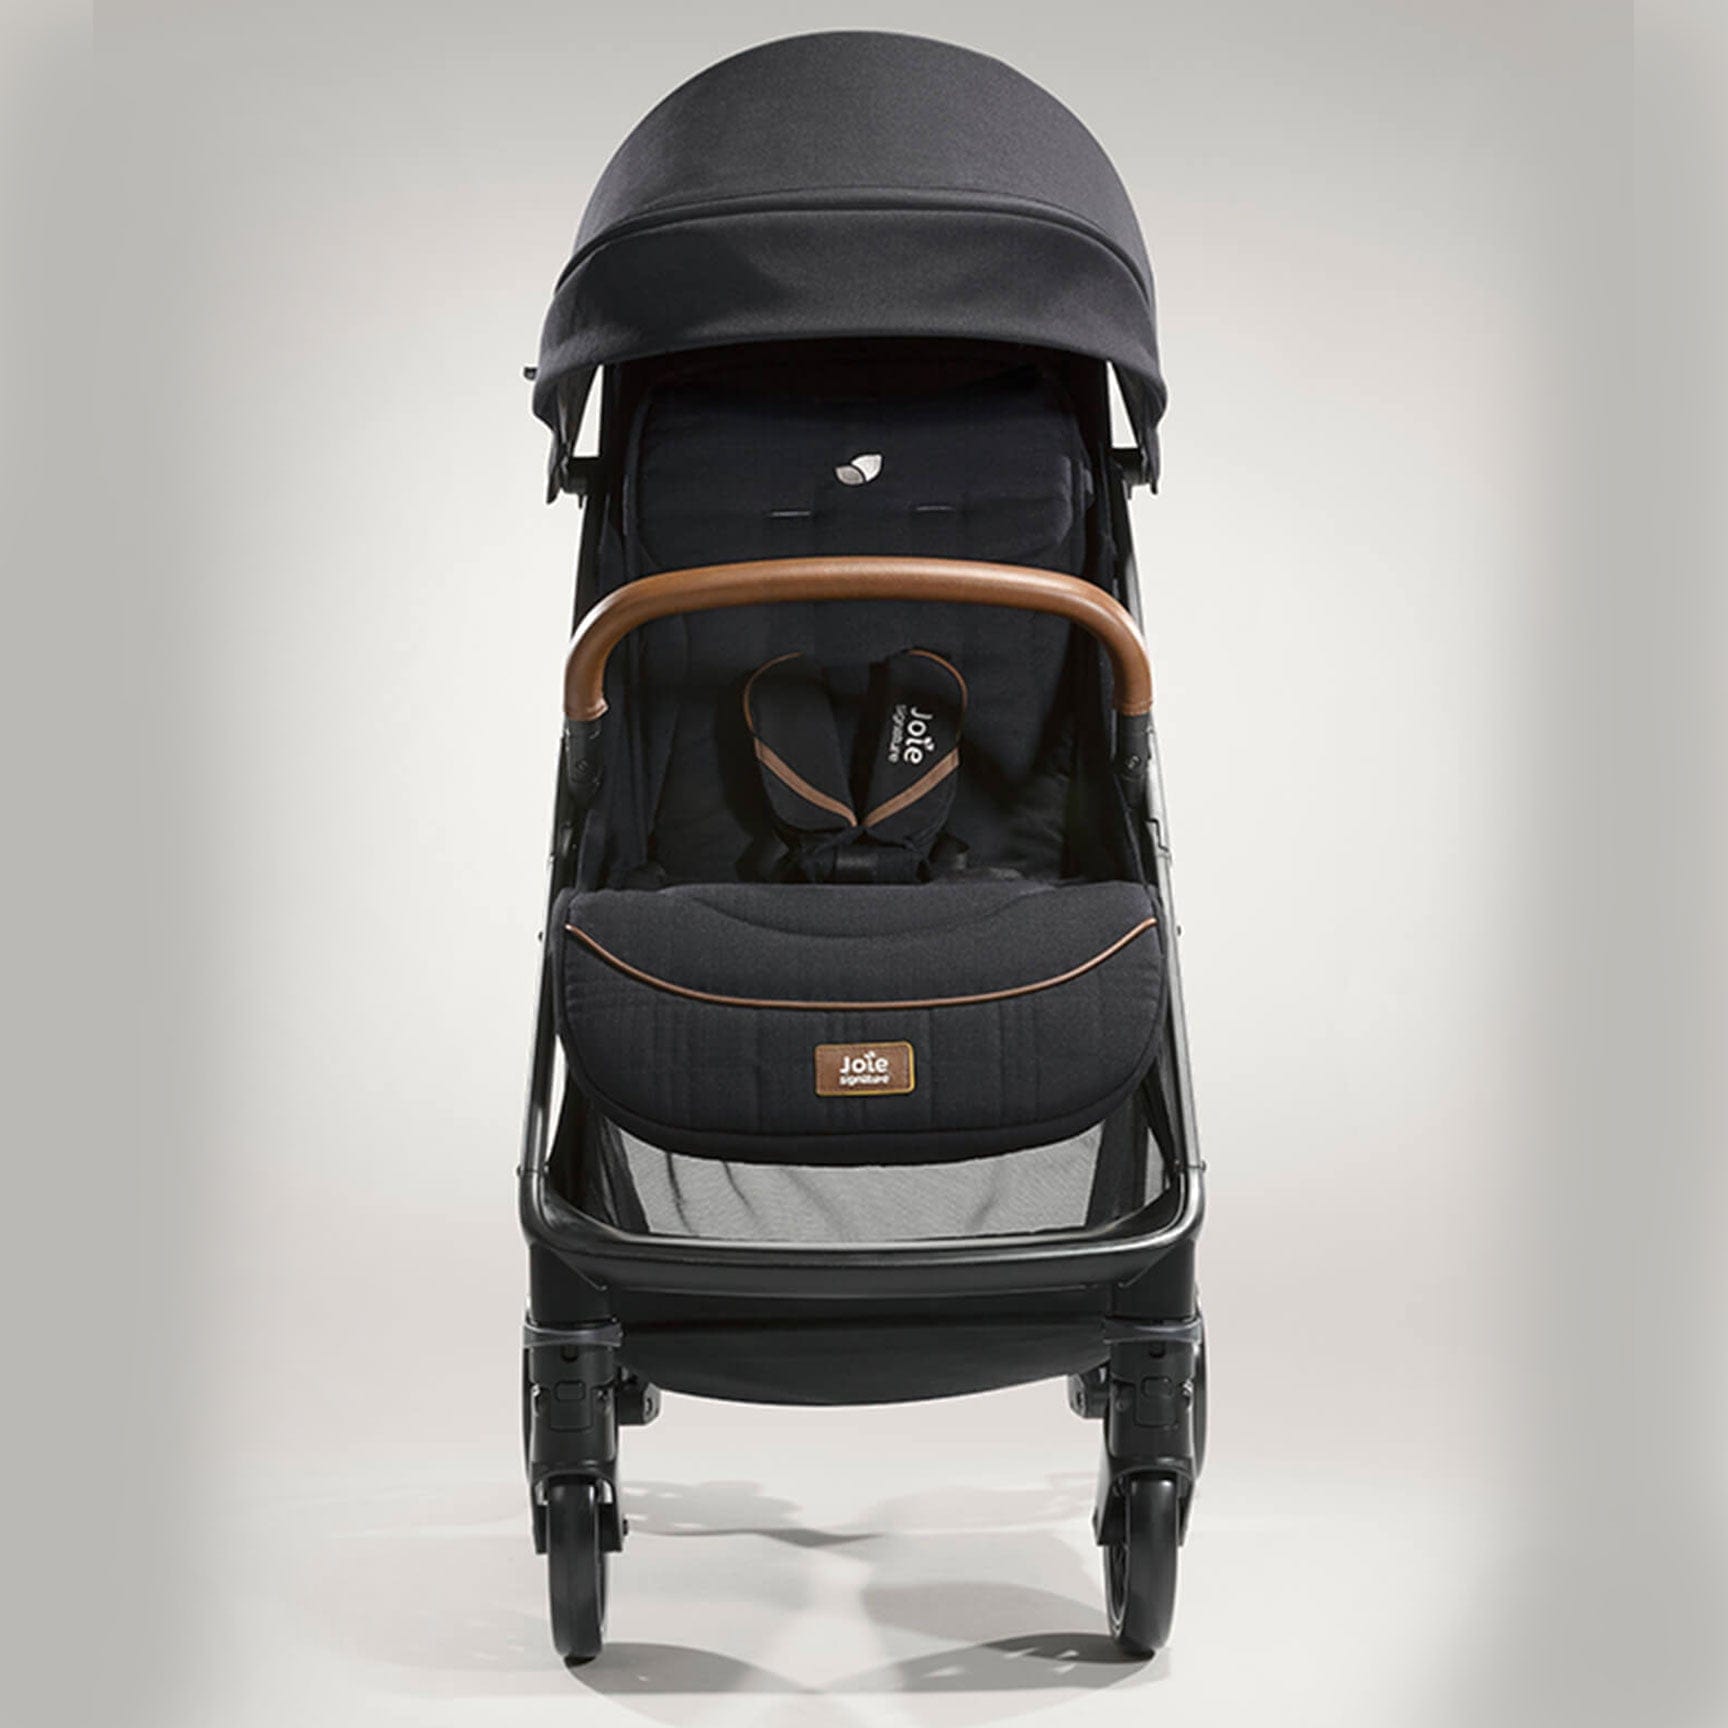 Joie Pushchairs & Buggies Joie Parcel Signature Stroller - Eclipse S2112AAECL000